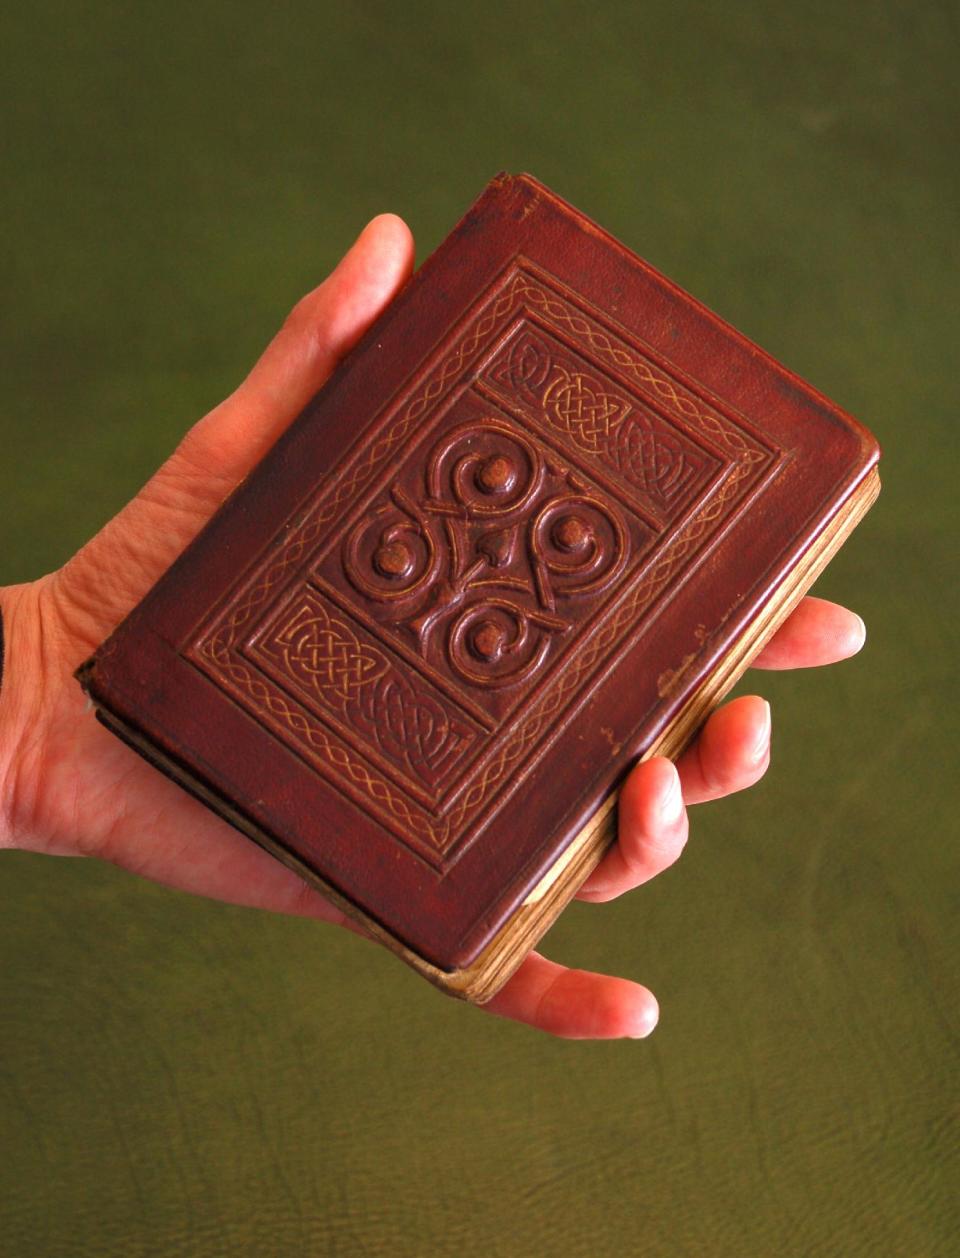 This photo, released by The British Library Tuesday April 17 2012, , shows the St. Cuthbert Gospel, a remarkably preserved palm-sized book which is a manuscript copy of the Gospel of John in Latin which was bought from the British branch of the Society of Jesus (the Jesuits), the library said Tuesday April 17, 2012. The small book - 96 mm (3.8 inches) by 136 mm (5.4 inches) - has an elaborately tooled red leather cover. It comes from the time of St. Cuthbert, who died in 687, and it was discovered inside his coffin at Durham Cathedral when it was reopened in 1104.  (AP Photo / The British Library)